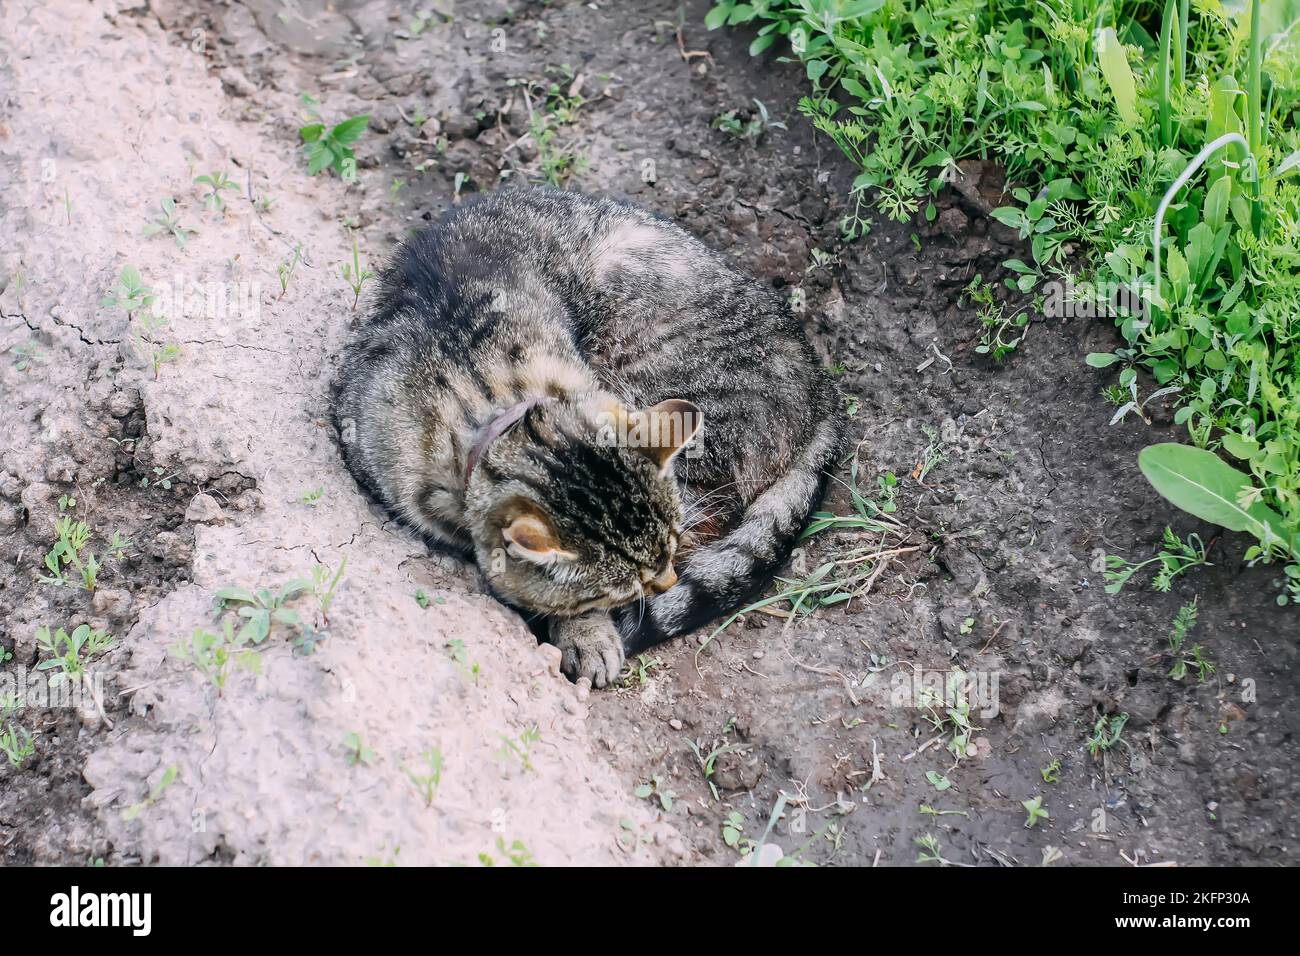 Cat sleeping on the ground in the vegetable garden Stock Photo